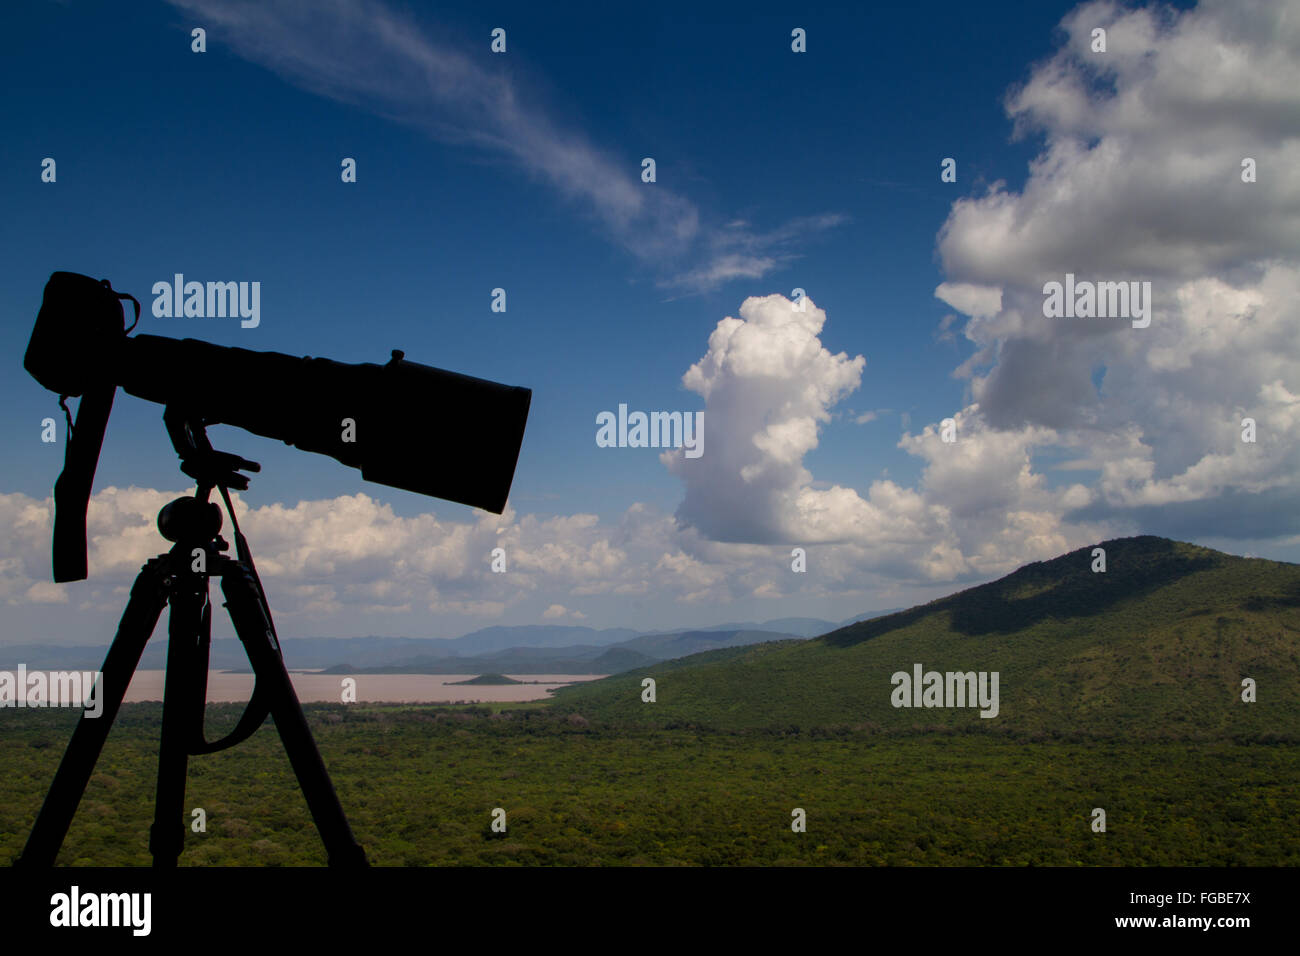 A telephoto lens silhouetted against the sky, Ethiopia Stock Photo